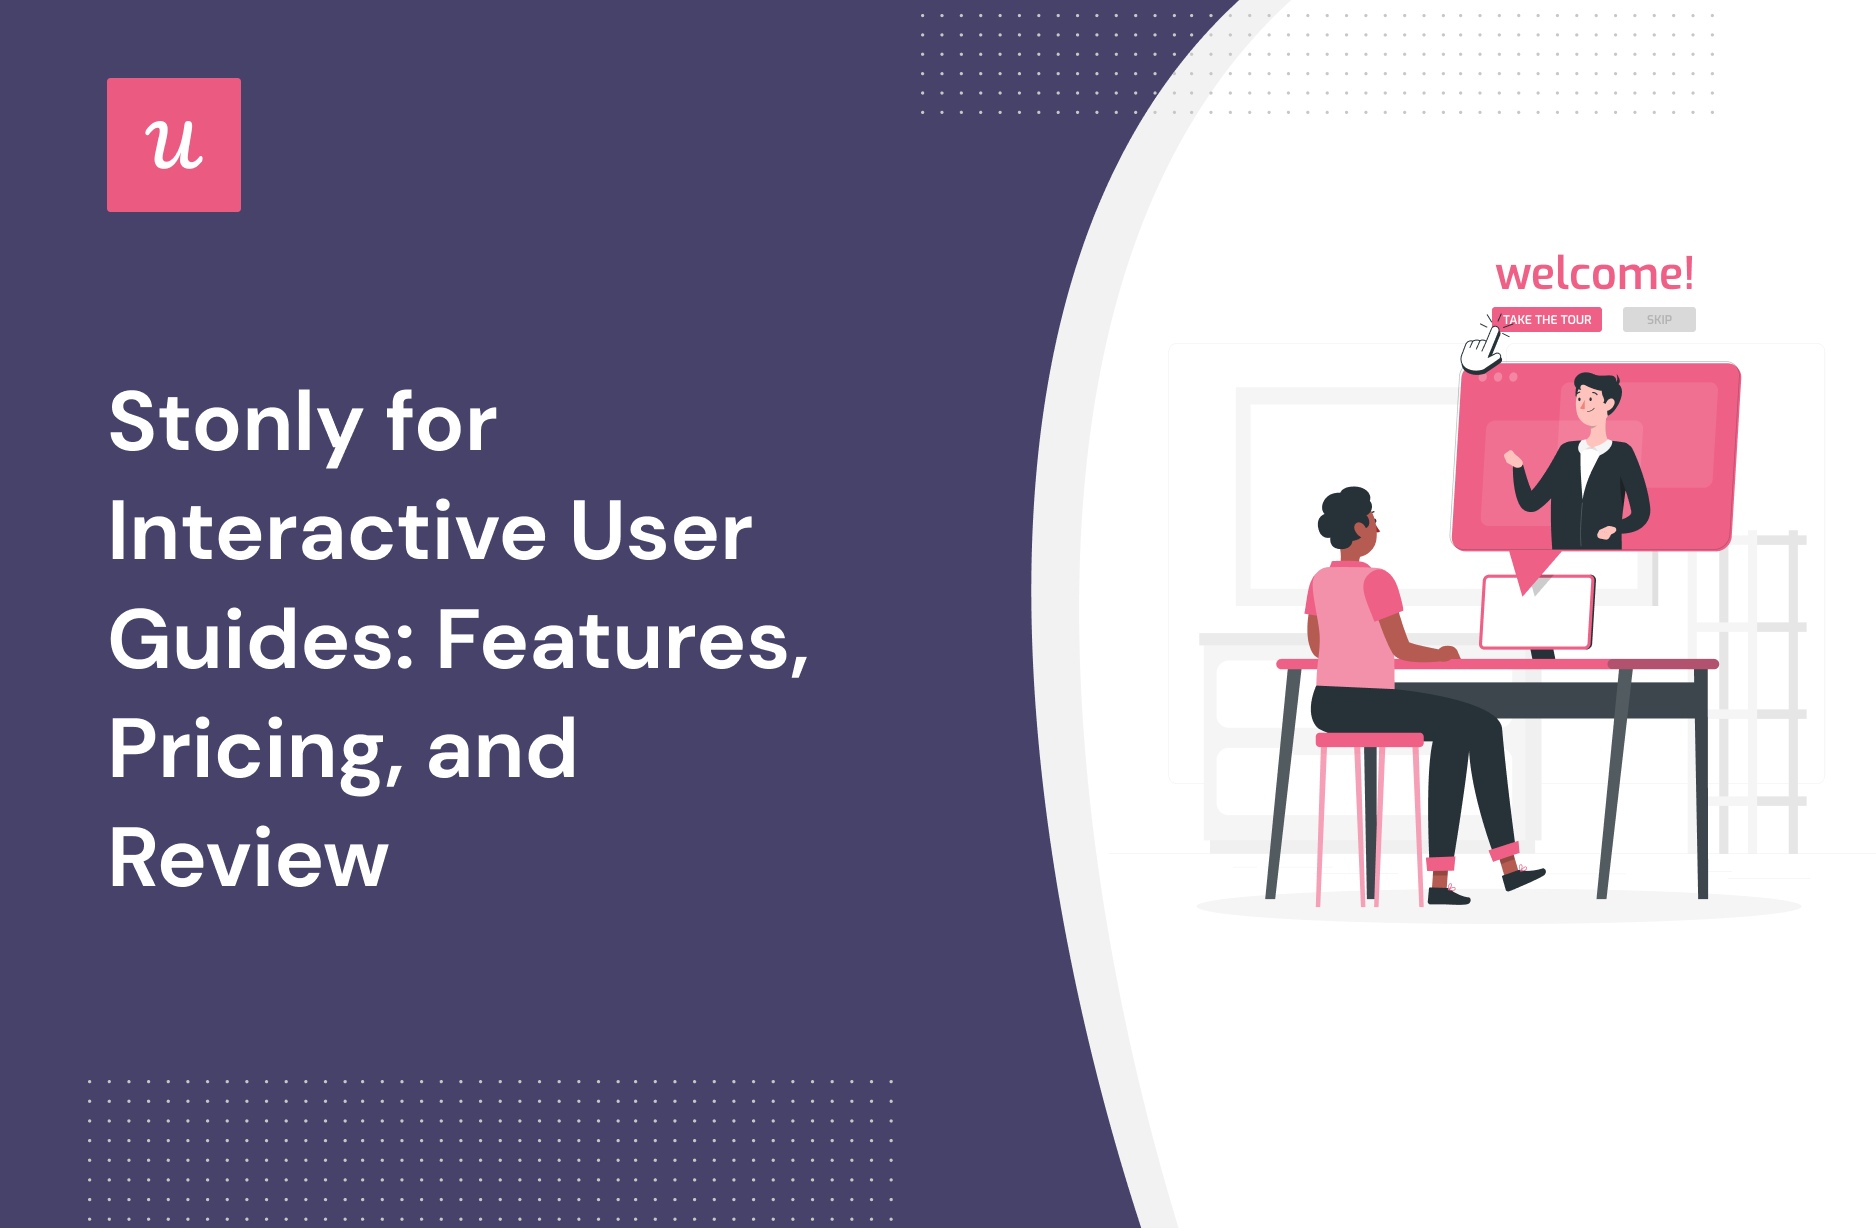 Stonly for Interactive User Guides: Features, Pricing, and Review